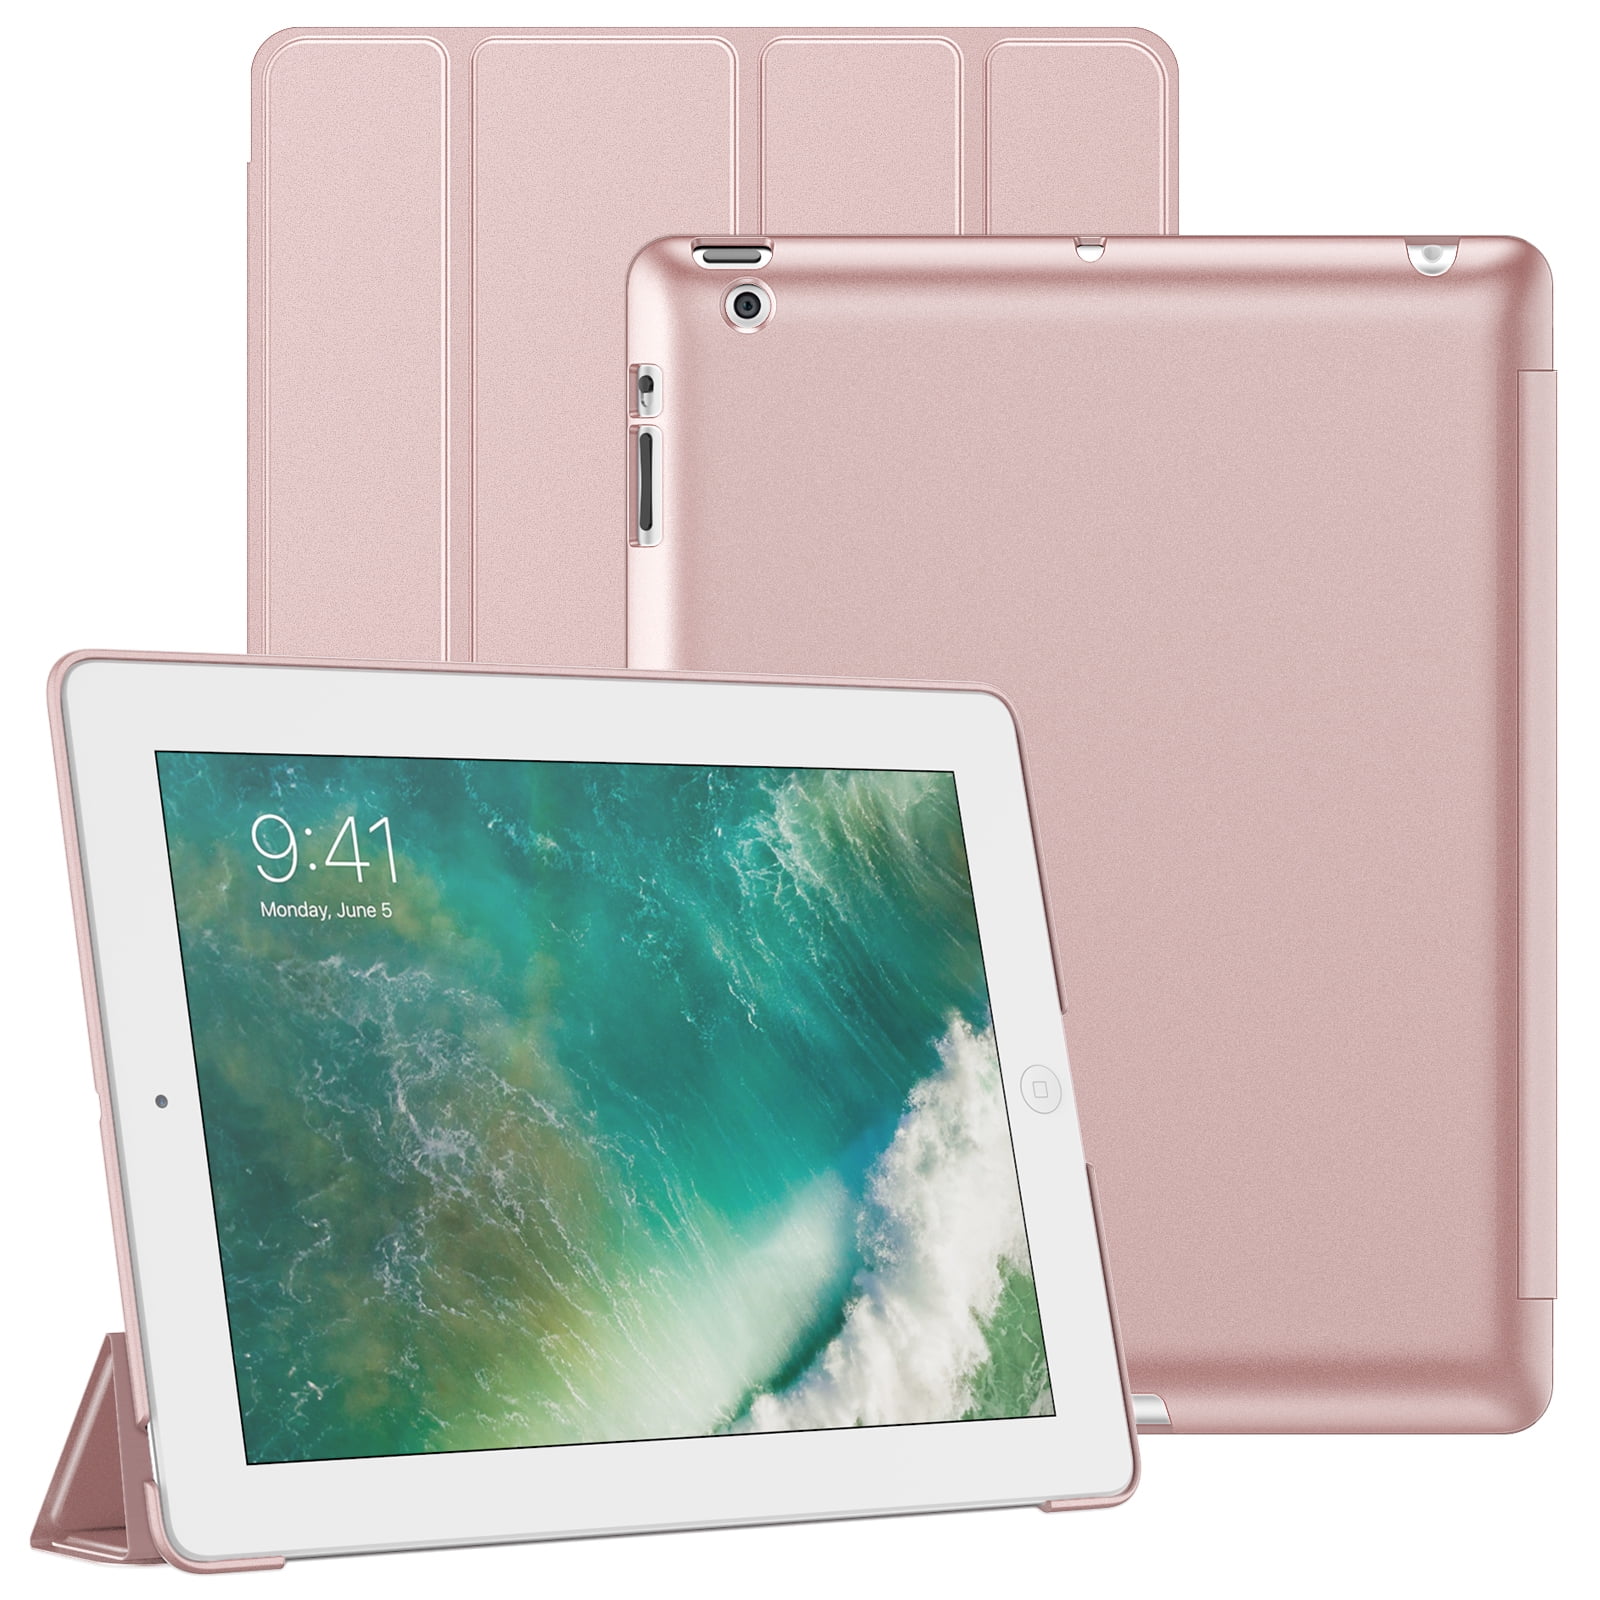 Buy Jetech Case For Ipad 234 Protective Hard Back Shell Soft Touch Tablet Stand Cover Auto Wakesleep Rose Gold Online At Lowest Price In Oman